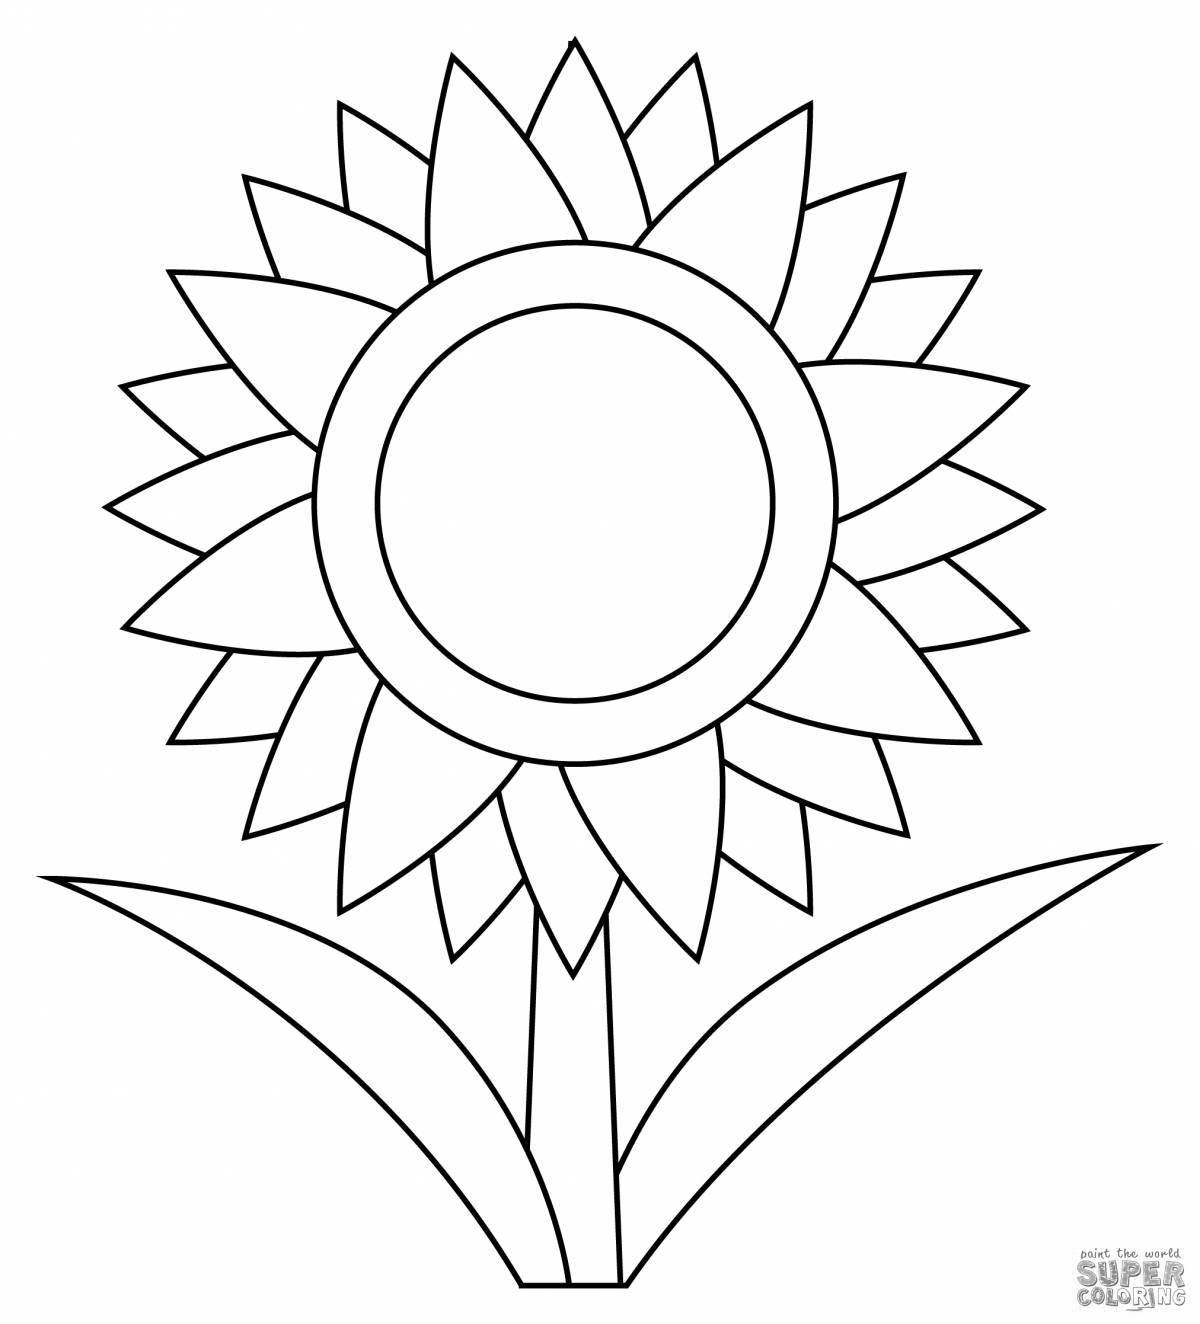 Great sunflowers coloring book for kids 2-3 years old